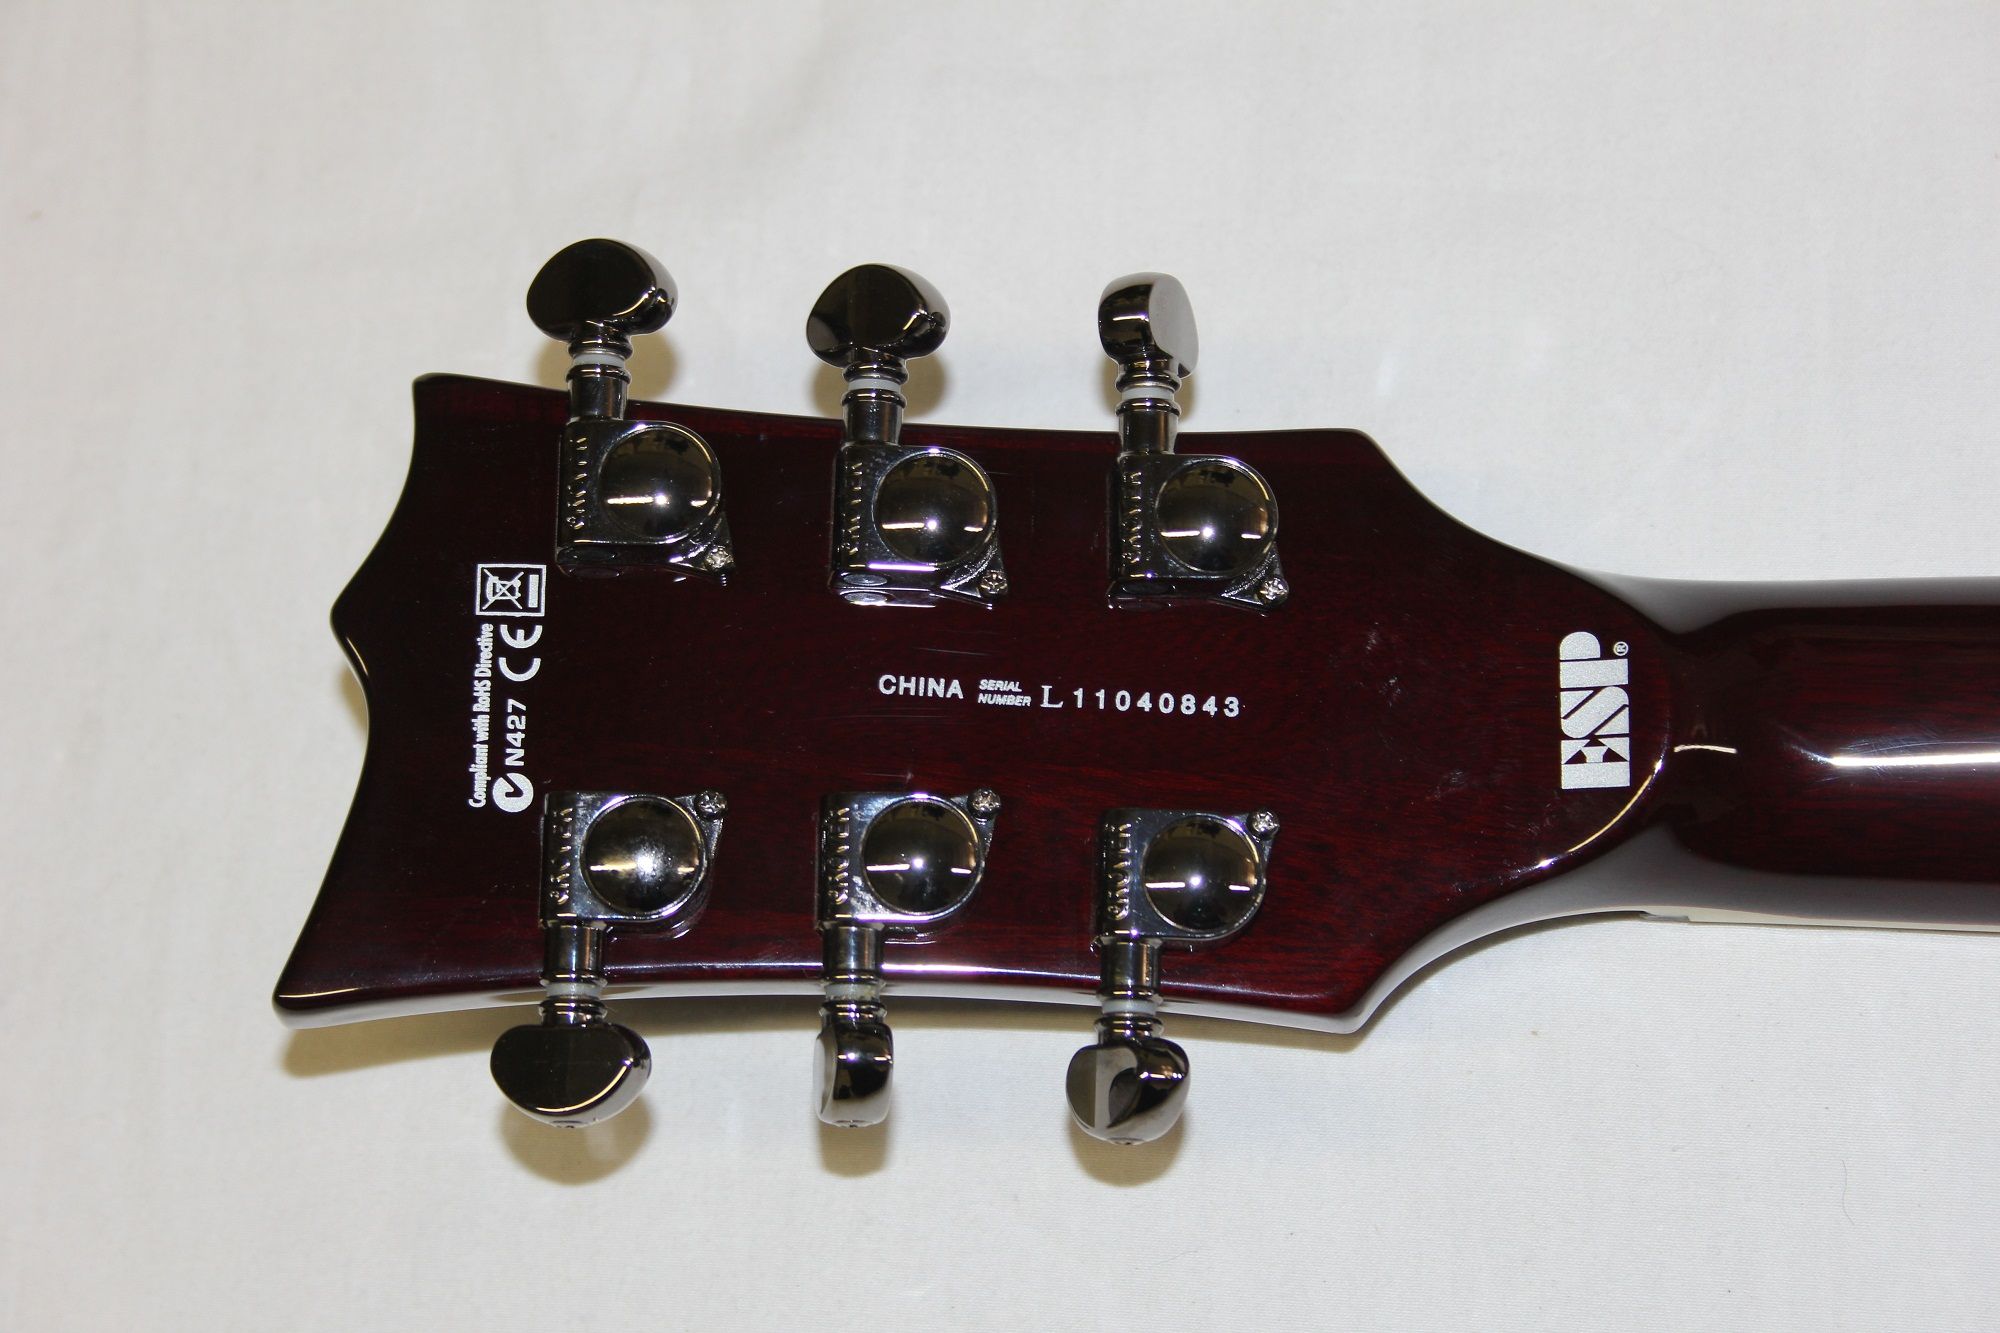 esp guitar serial numbers starting with l